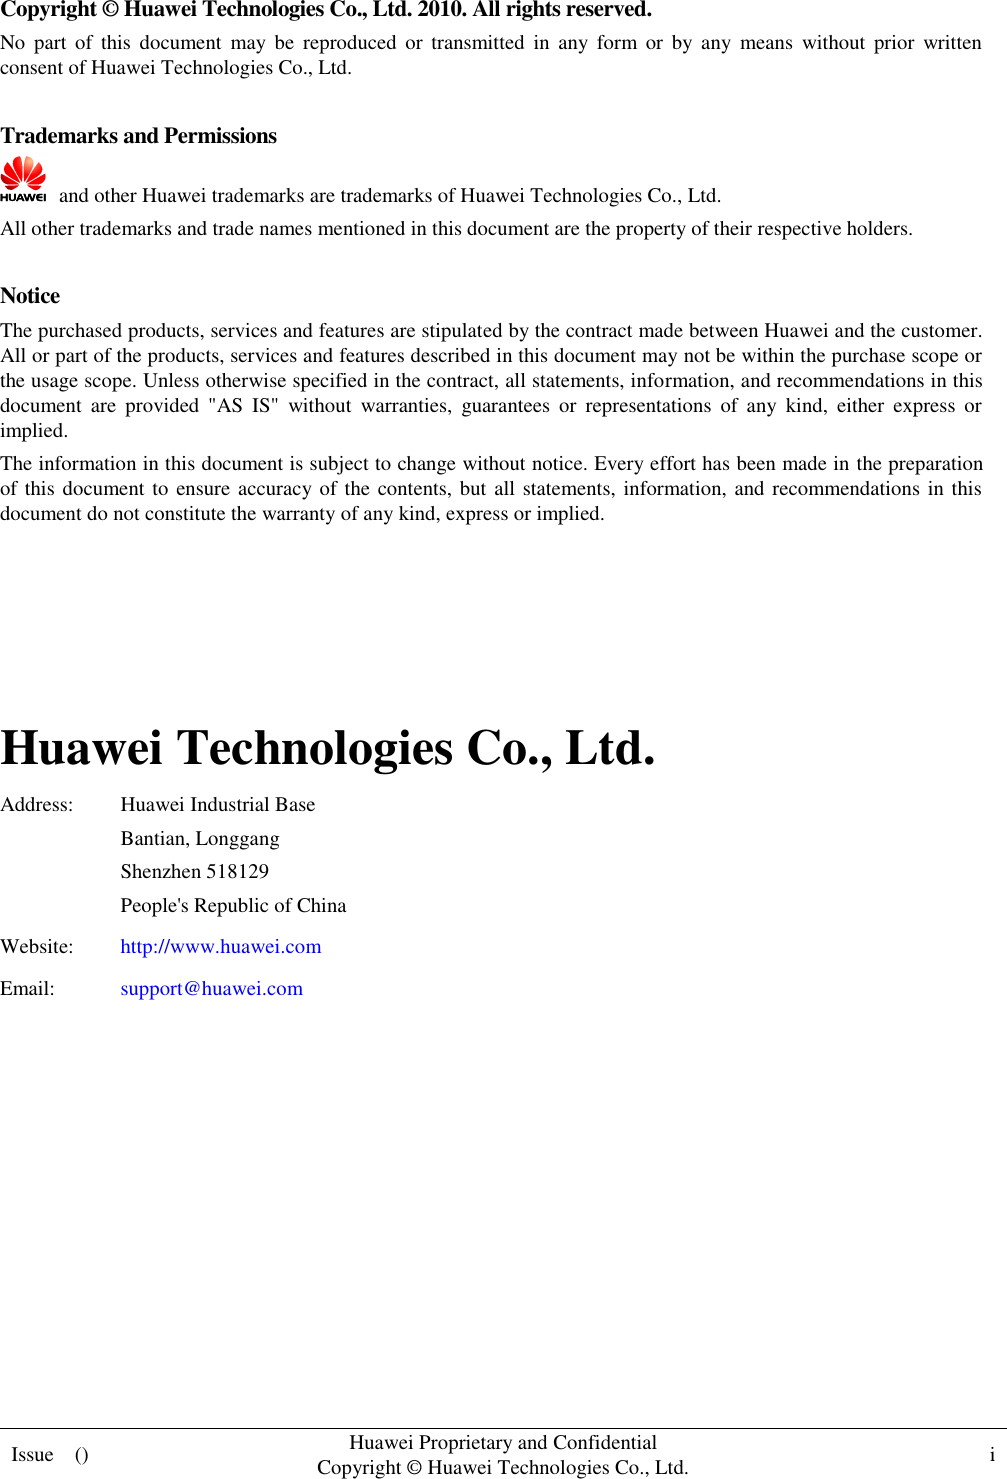  Issue    () Huawei Proprietary and Confidential                                     Copyright © Huawei Technologies Co., Ltd. i    Copyright © Huawei Technologies Co., Ltd. 2010. All rights reserved. No  part  of  this  document  may  be  reproduced  or  transmitted  in  any  form  or  by  any  means  without  prior  written consent of Huawei Technologies Co., Ltd.  Trademarks and Permissions   and other Huawei trademarks are trademarks of Huawei Technologies Co., Ltd. All other trademarks and trade names mentioned in this document are the property of their respective holders.  Notice The purchased products, services and features are stipulated by the contract made between Huawei and the customer. All or part of the products, services and features described in this document may not be within the purchase scope or the usage scope. Unless otherwise specified in the contract, all statements, information, and recommendations in this document  are  provided  &quot;AS  IS&quot;  without  warranties,  guarantees  or  representations  of  any  kind,  either  express  or implied. The information in this document is subject to change without notice. Every effort has been made in the preparation of this document to ensure accuracy of the contents, but all statements, information, and recommendations in this document do not constitute the warranty of any kind, express or implied.     Huawei Technologies Co., Ltd. Address: Huawei Industrial Base Bantian, Longgang Shenzhen 518129 People&apos;s Republic of China Website: http://www.huawei.com Email: support@huawei.com          